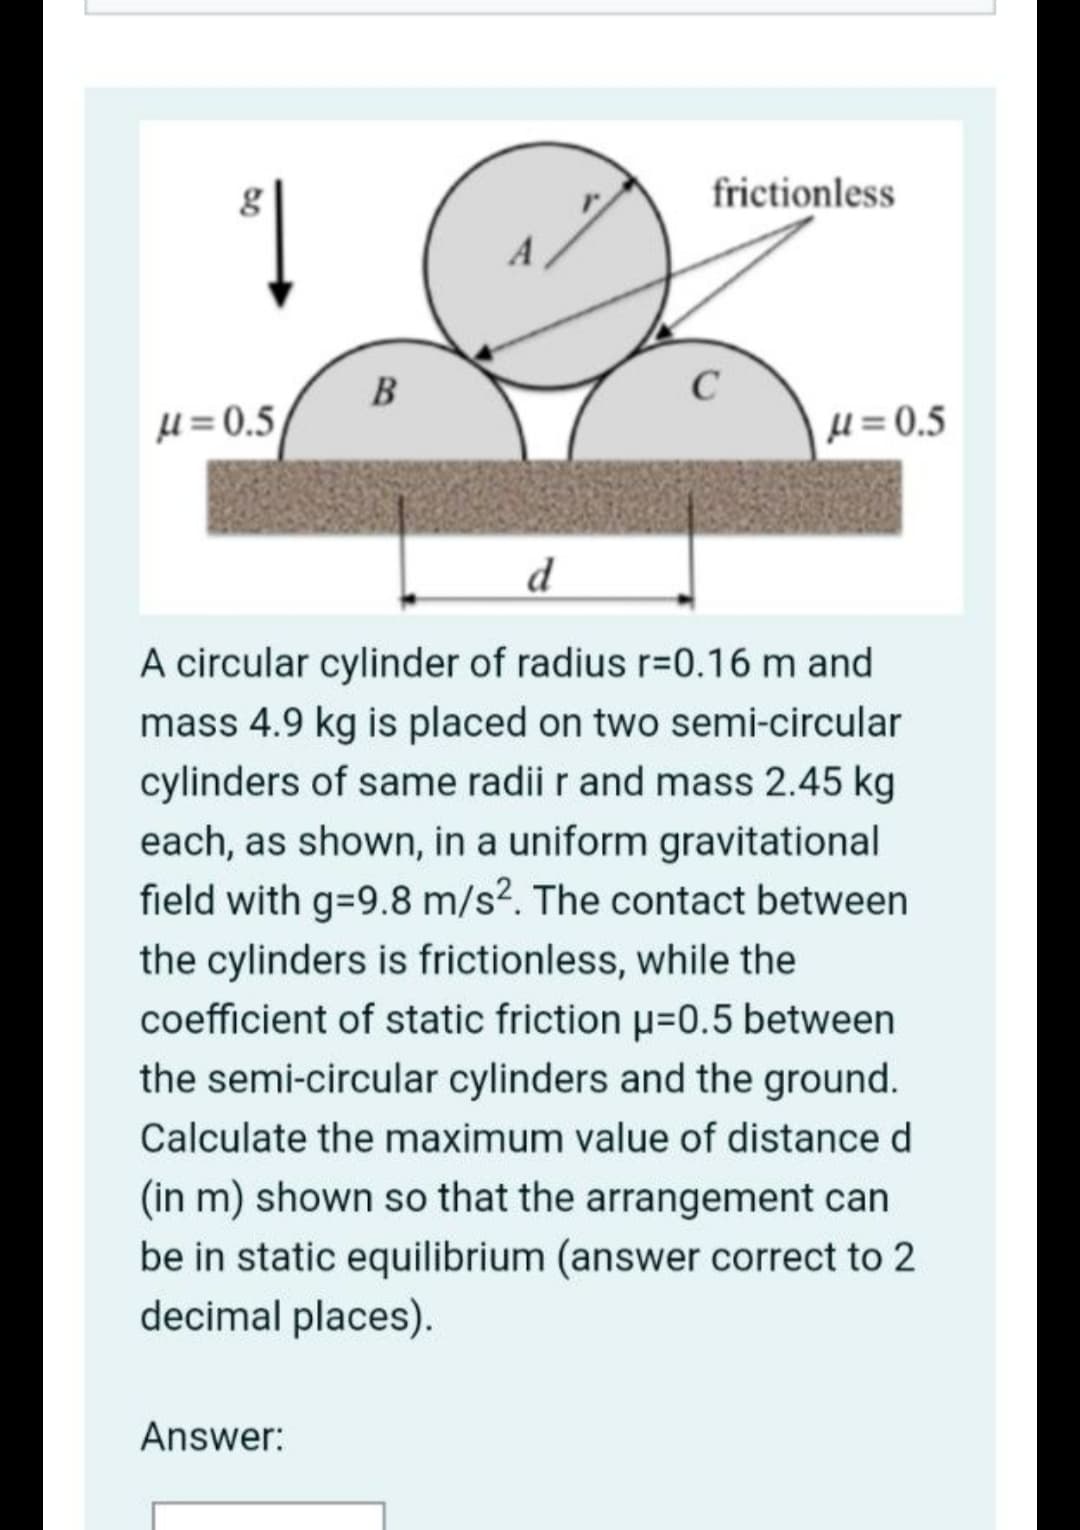 frictionless
1
A
B
µ = 0.5
H = 0.5
d
A circular cylinder of radius r=0.16 m and
mass 4.9 kg is placed on two semi-circular
cylinders of same radii r and mass 2.45 kg
each, as shown, in a uniform gravitational
field with g-9.8 m/s?. The contact between
the cylinders is frictionless, while the
coefficient of static friction µ=0.5 between
the semi-circular cylinders and the ground.
Calculate the maximum value of distance d
(in m) shown so that the arrangement can
be in static equilibrium (answer correct to 2
decimal places).
Answer:
